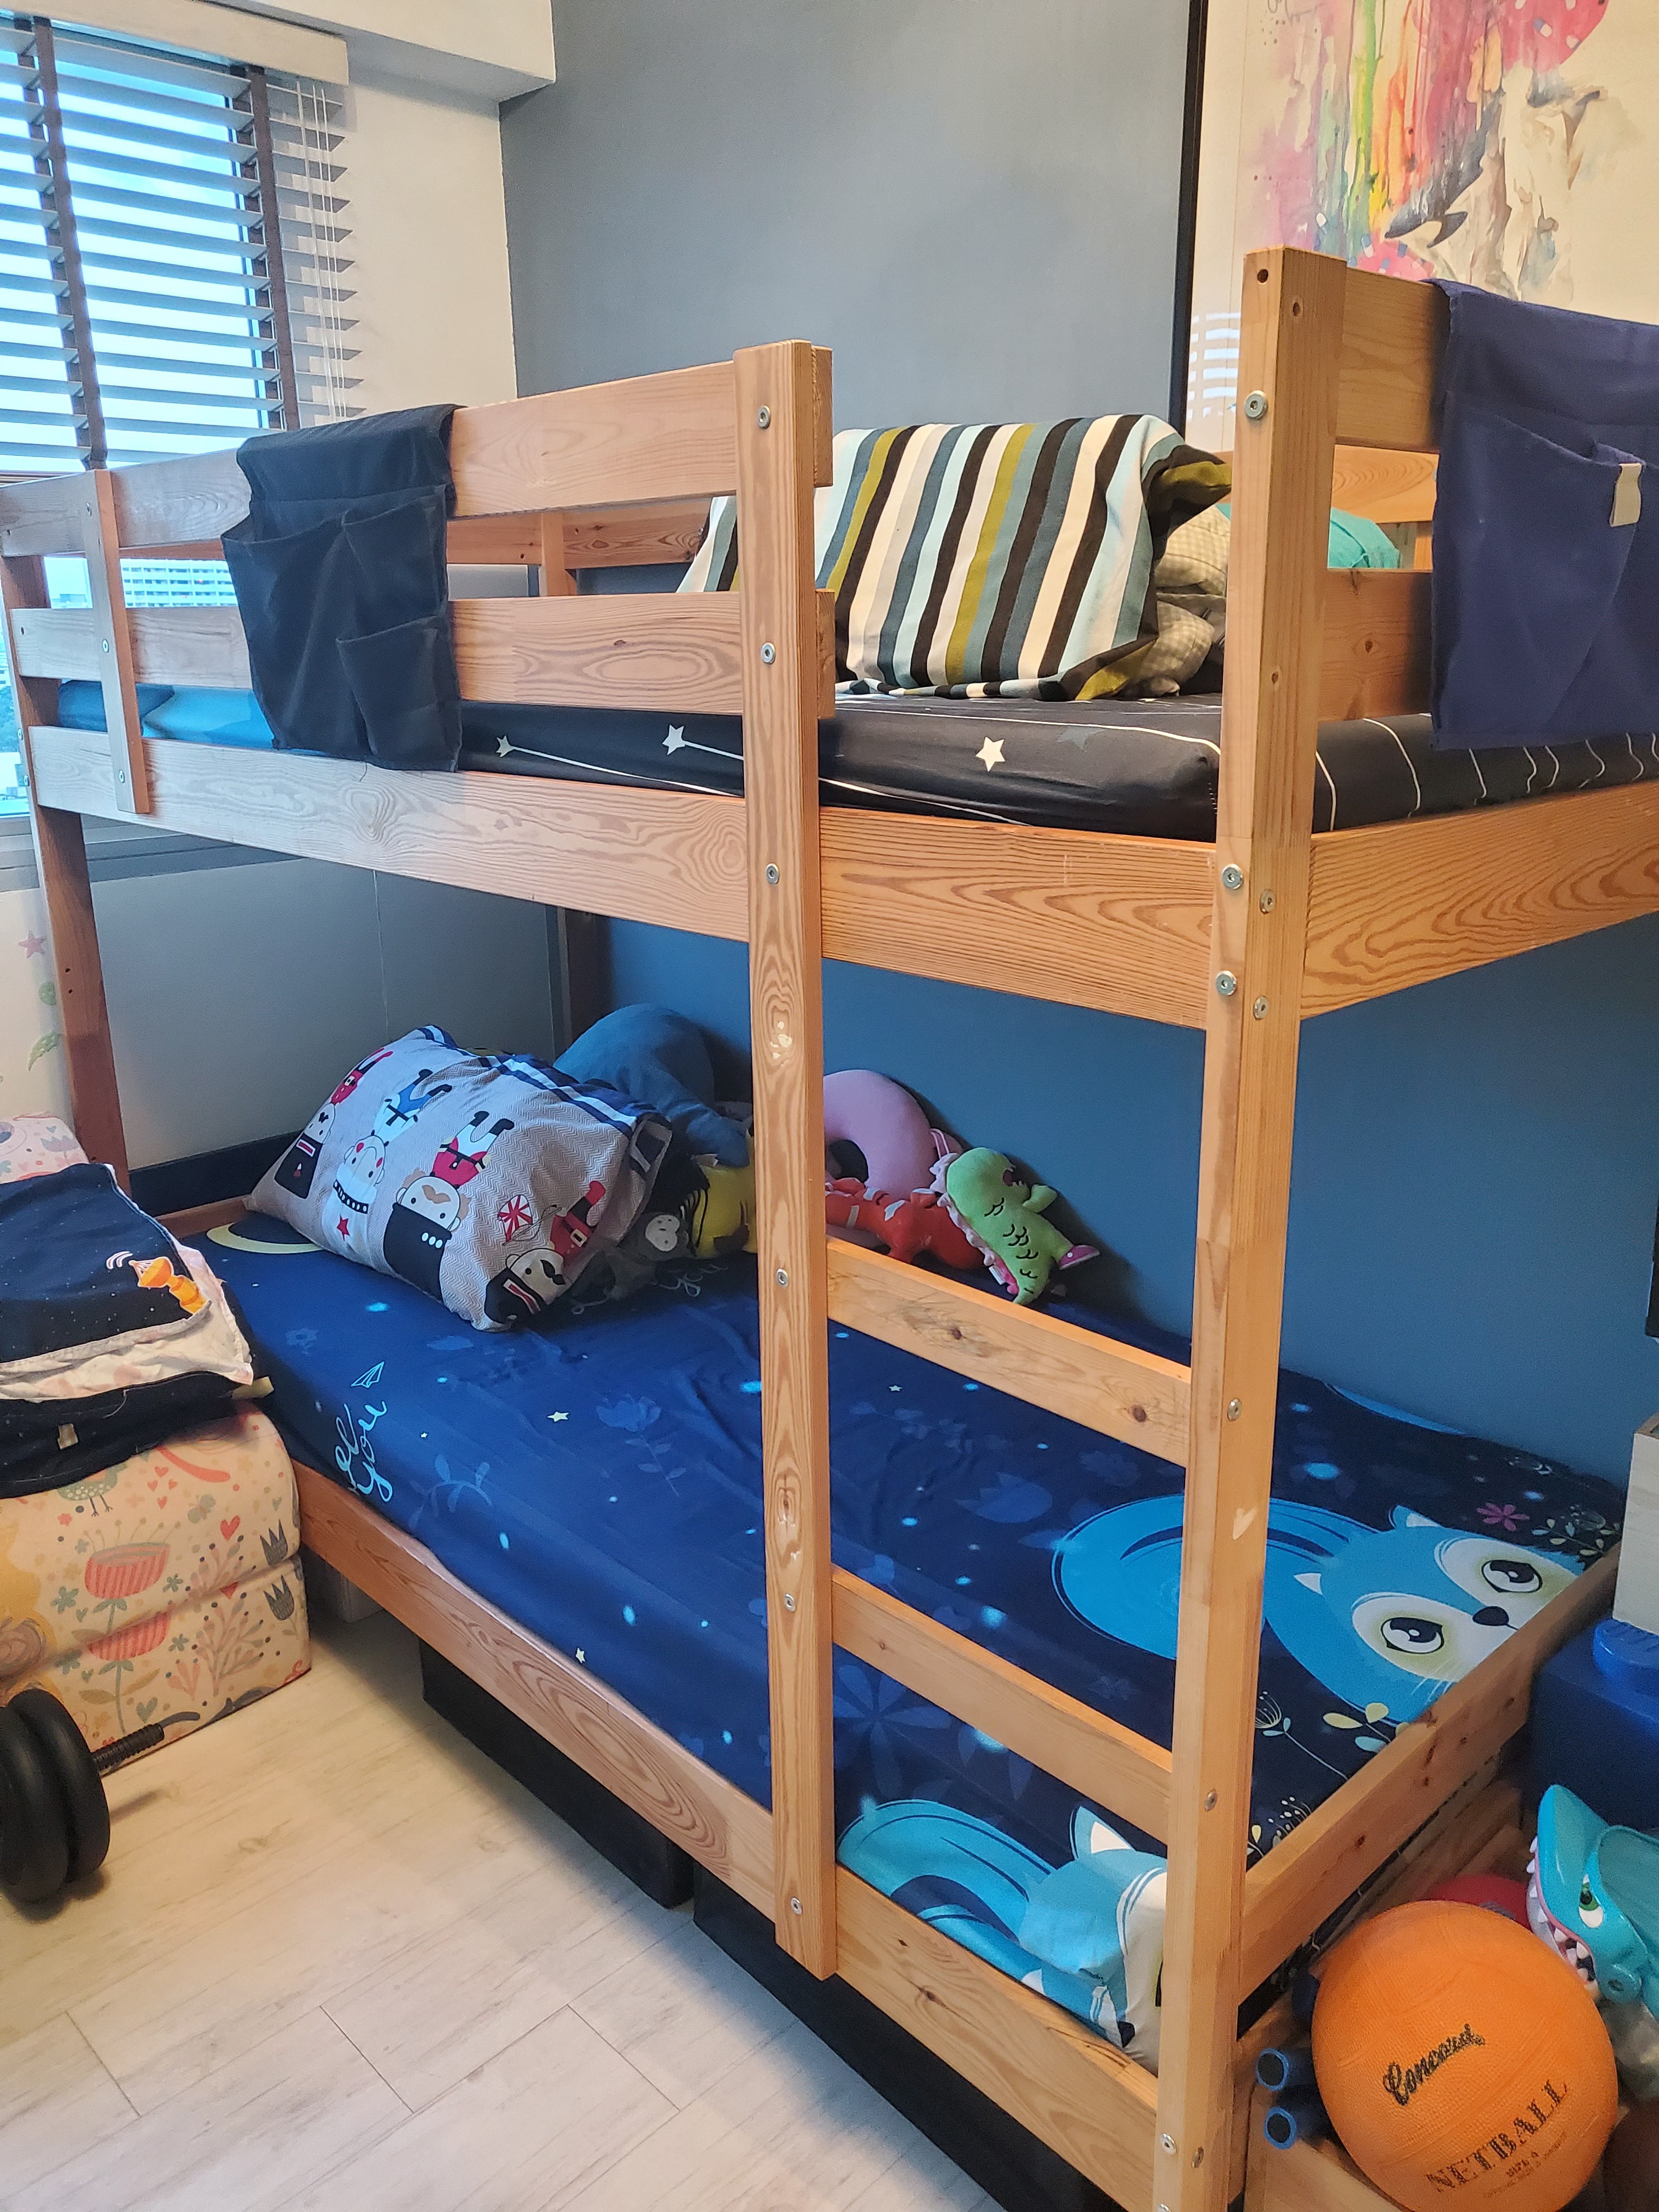 Ikea Bunk Bed Furniture Home Living, 3 Person Bunk Bed Ikea